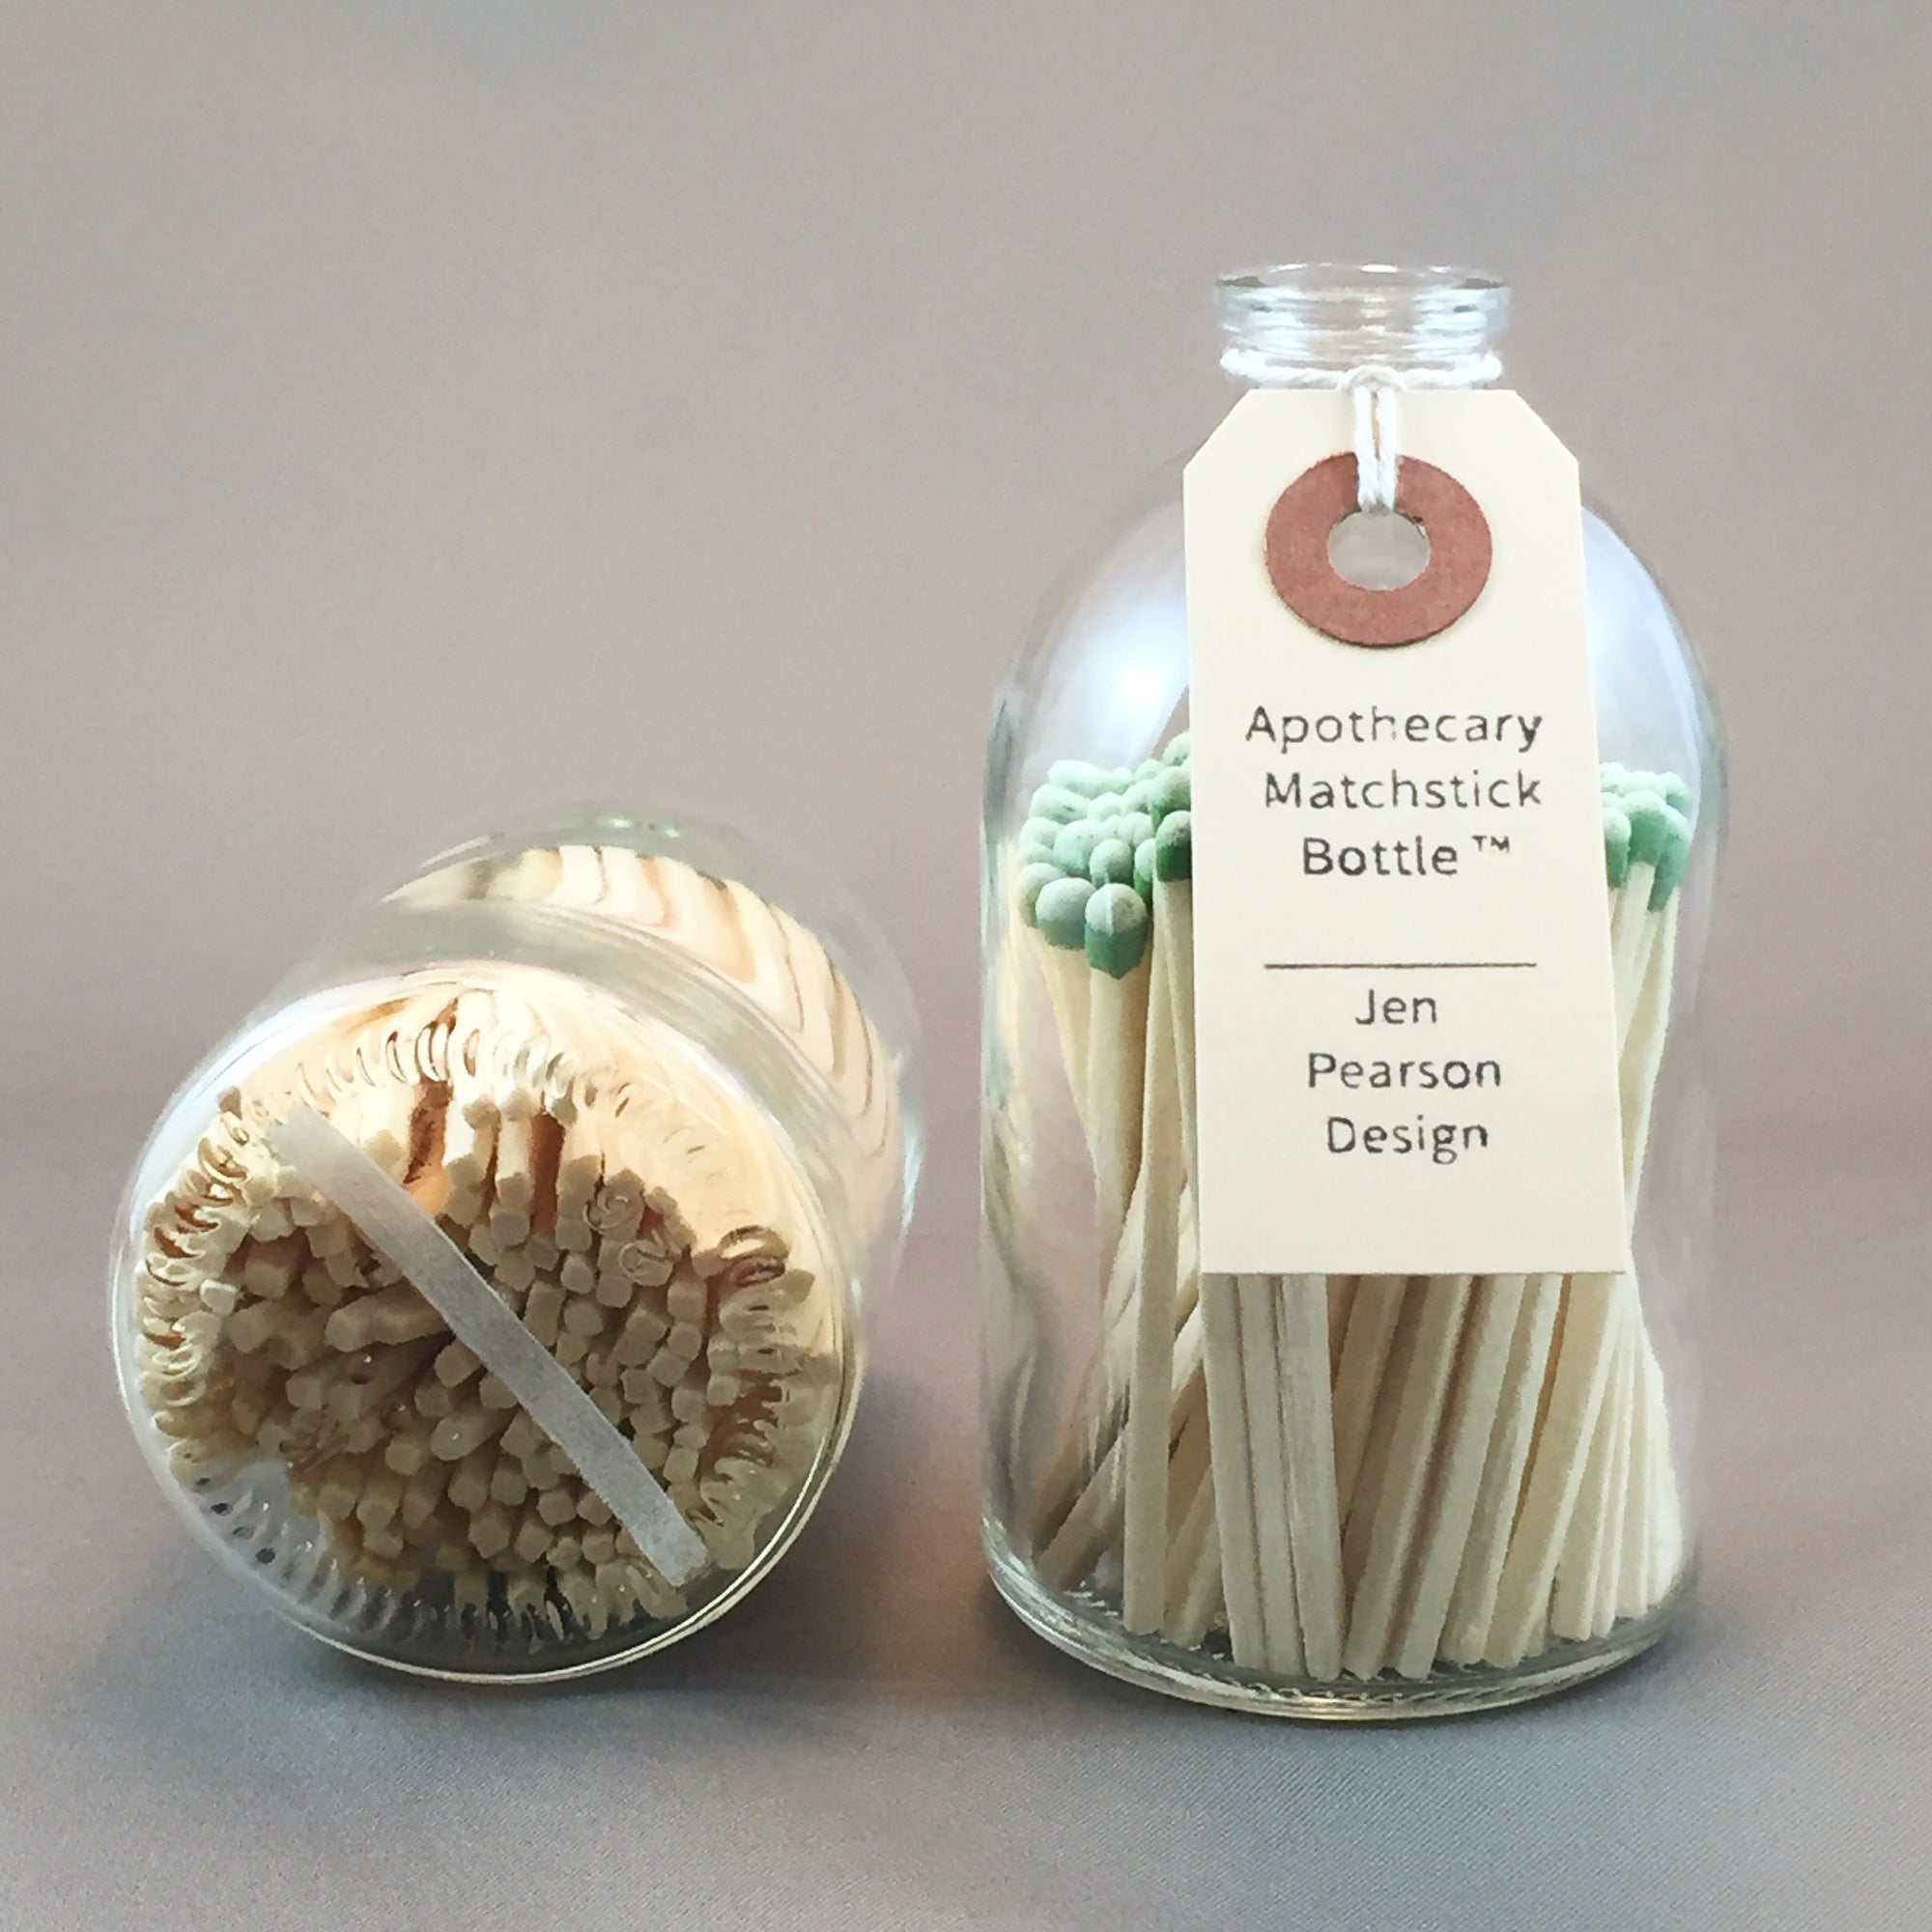 Apothecary Matchstick Bottle